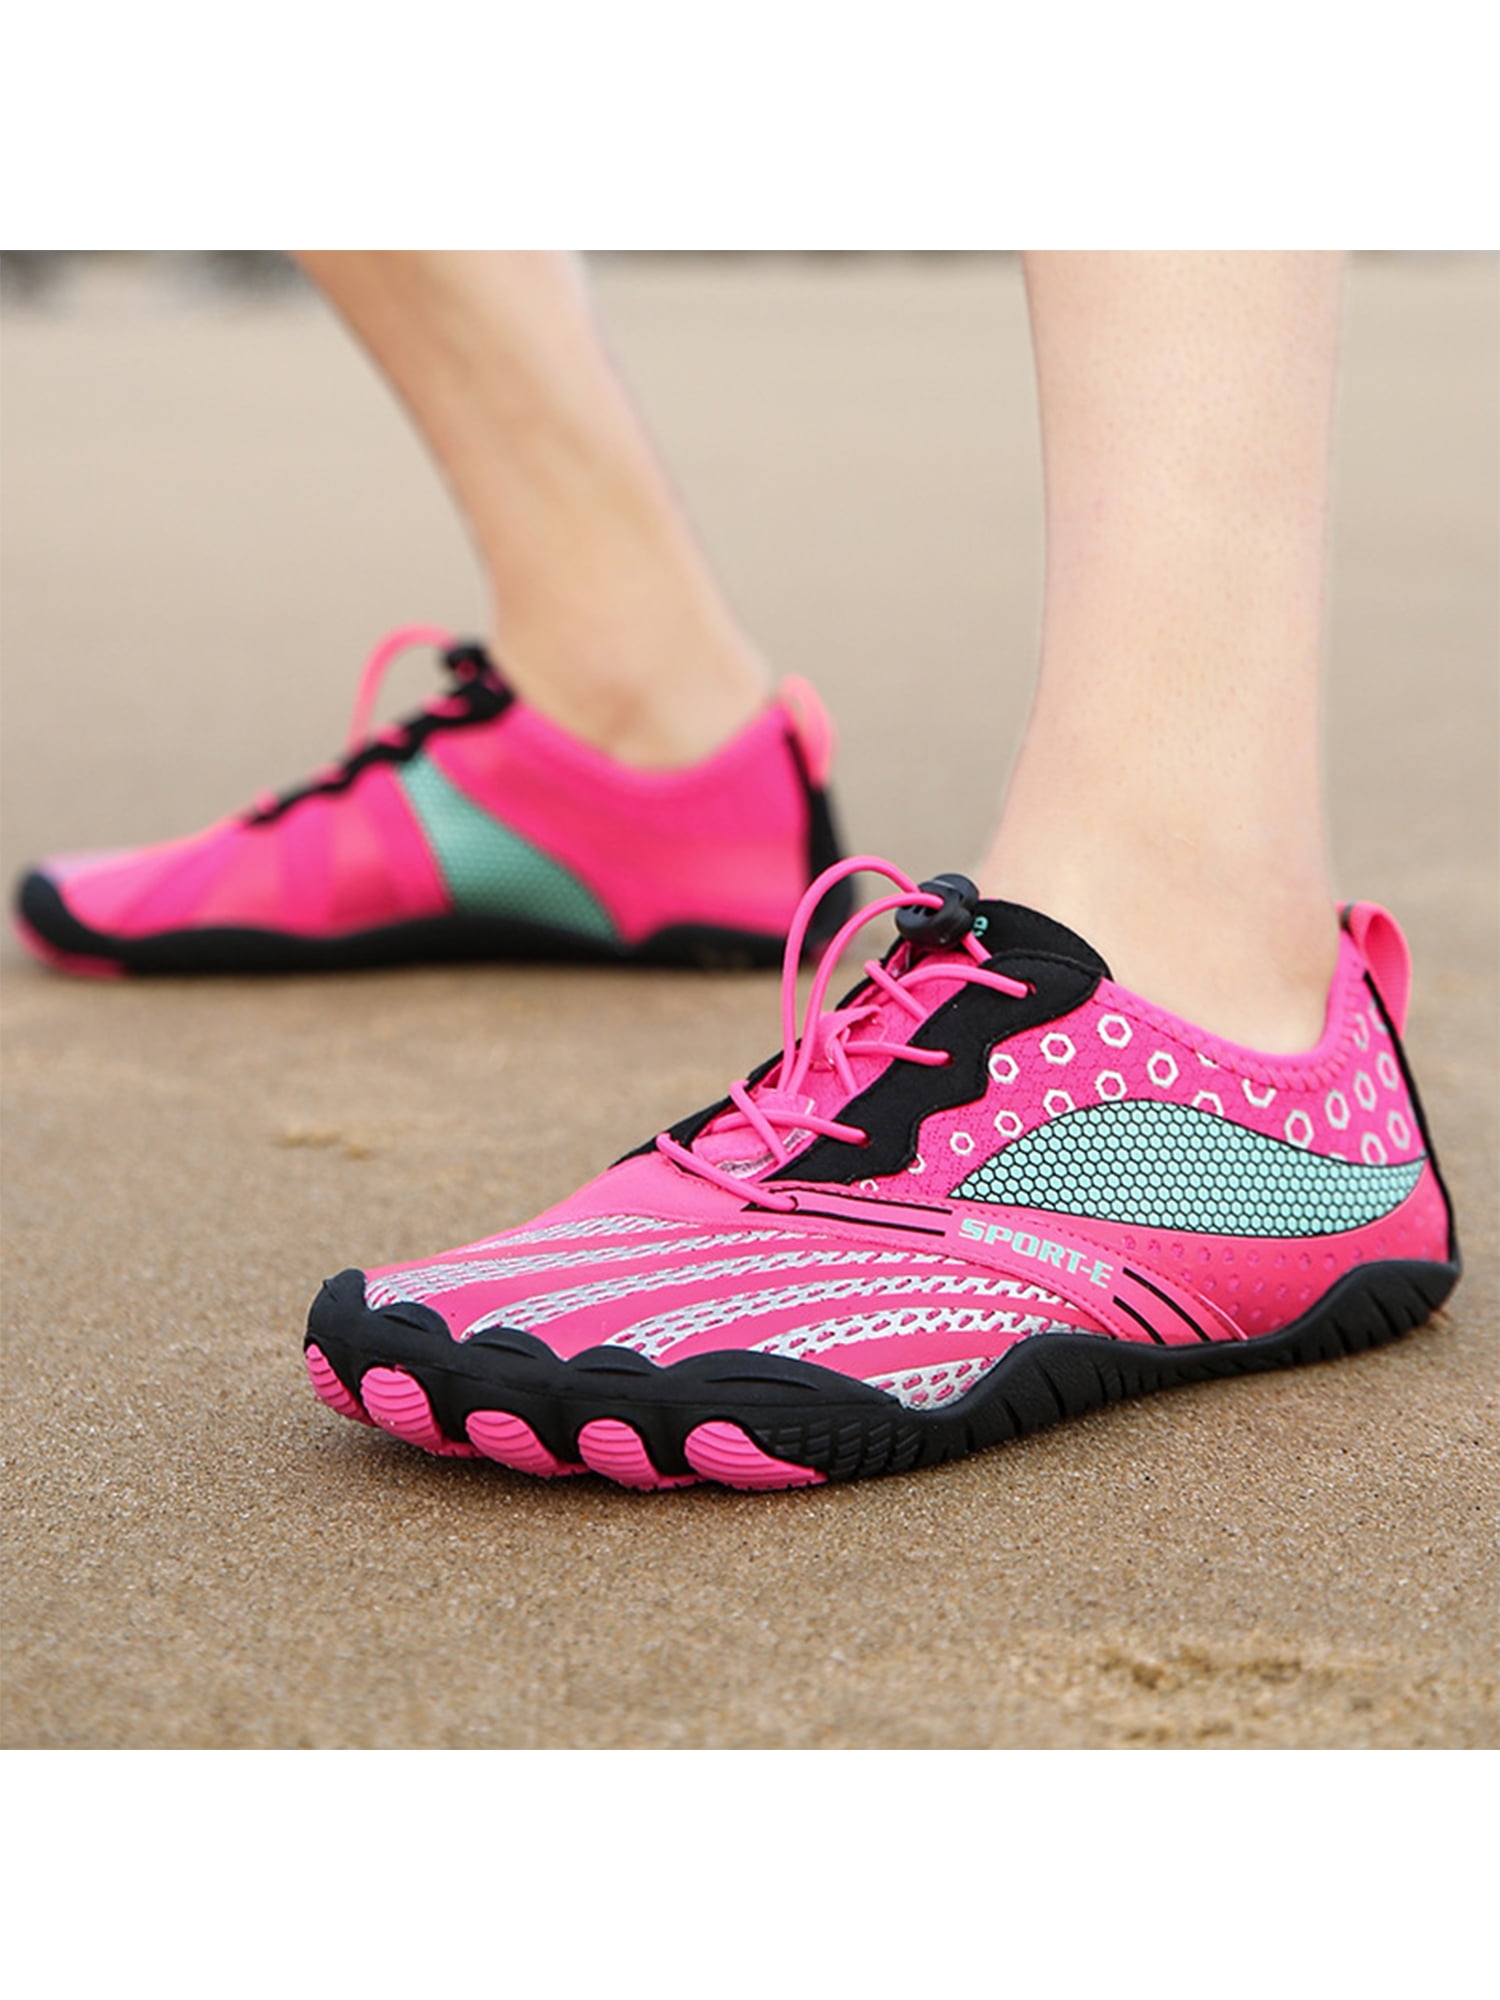 Female Summer Diamond Printed Quick-Dry Yoga Aqua Shoes Lightweight Slip-Proof Sport Surf Wading Shoes Women Water Shoes